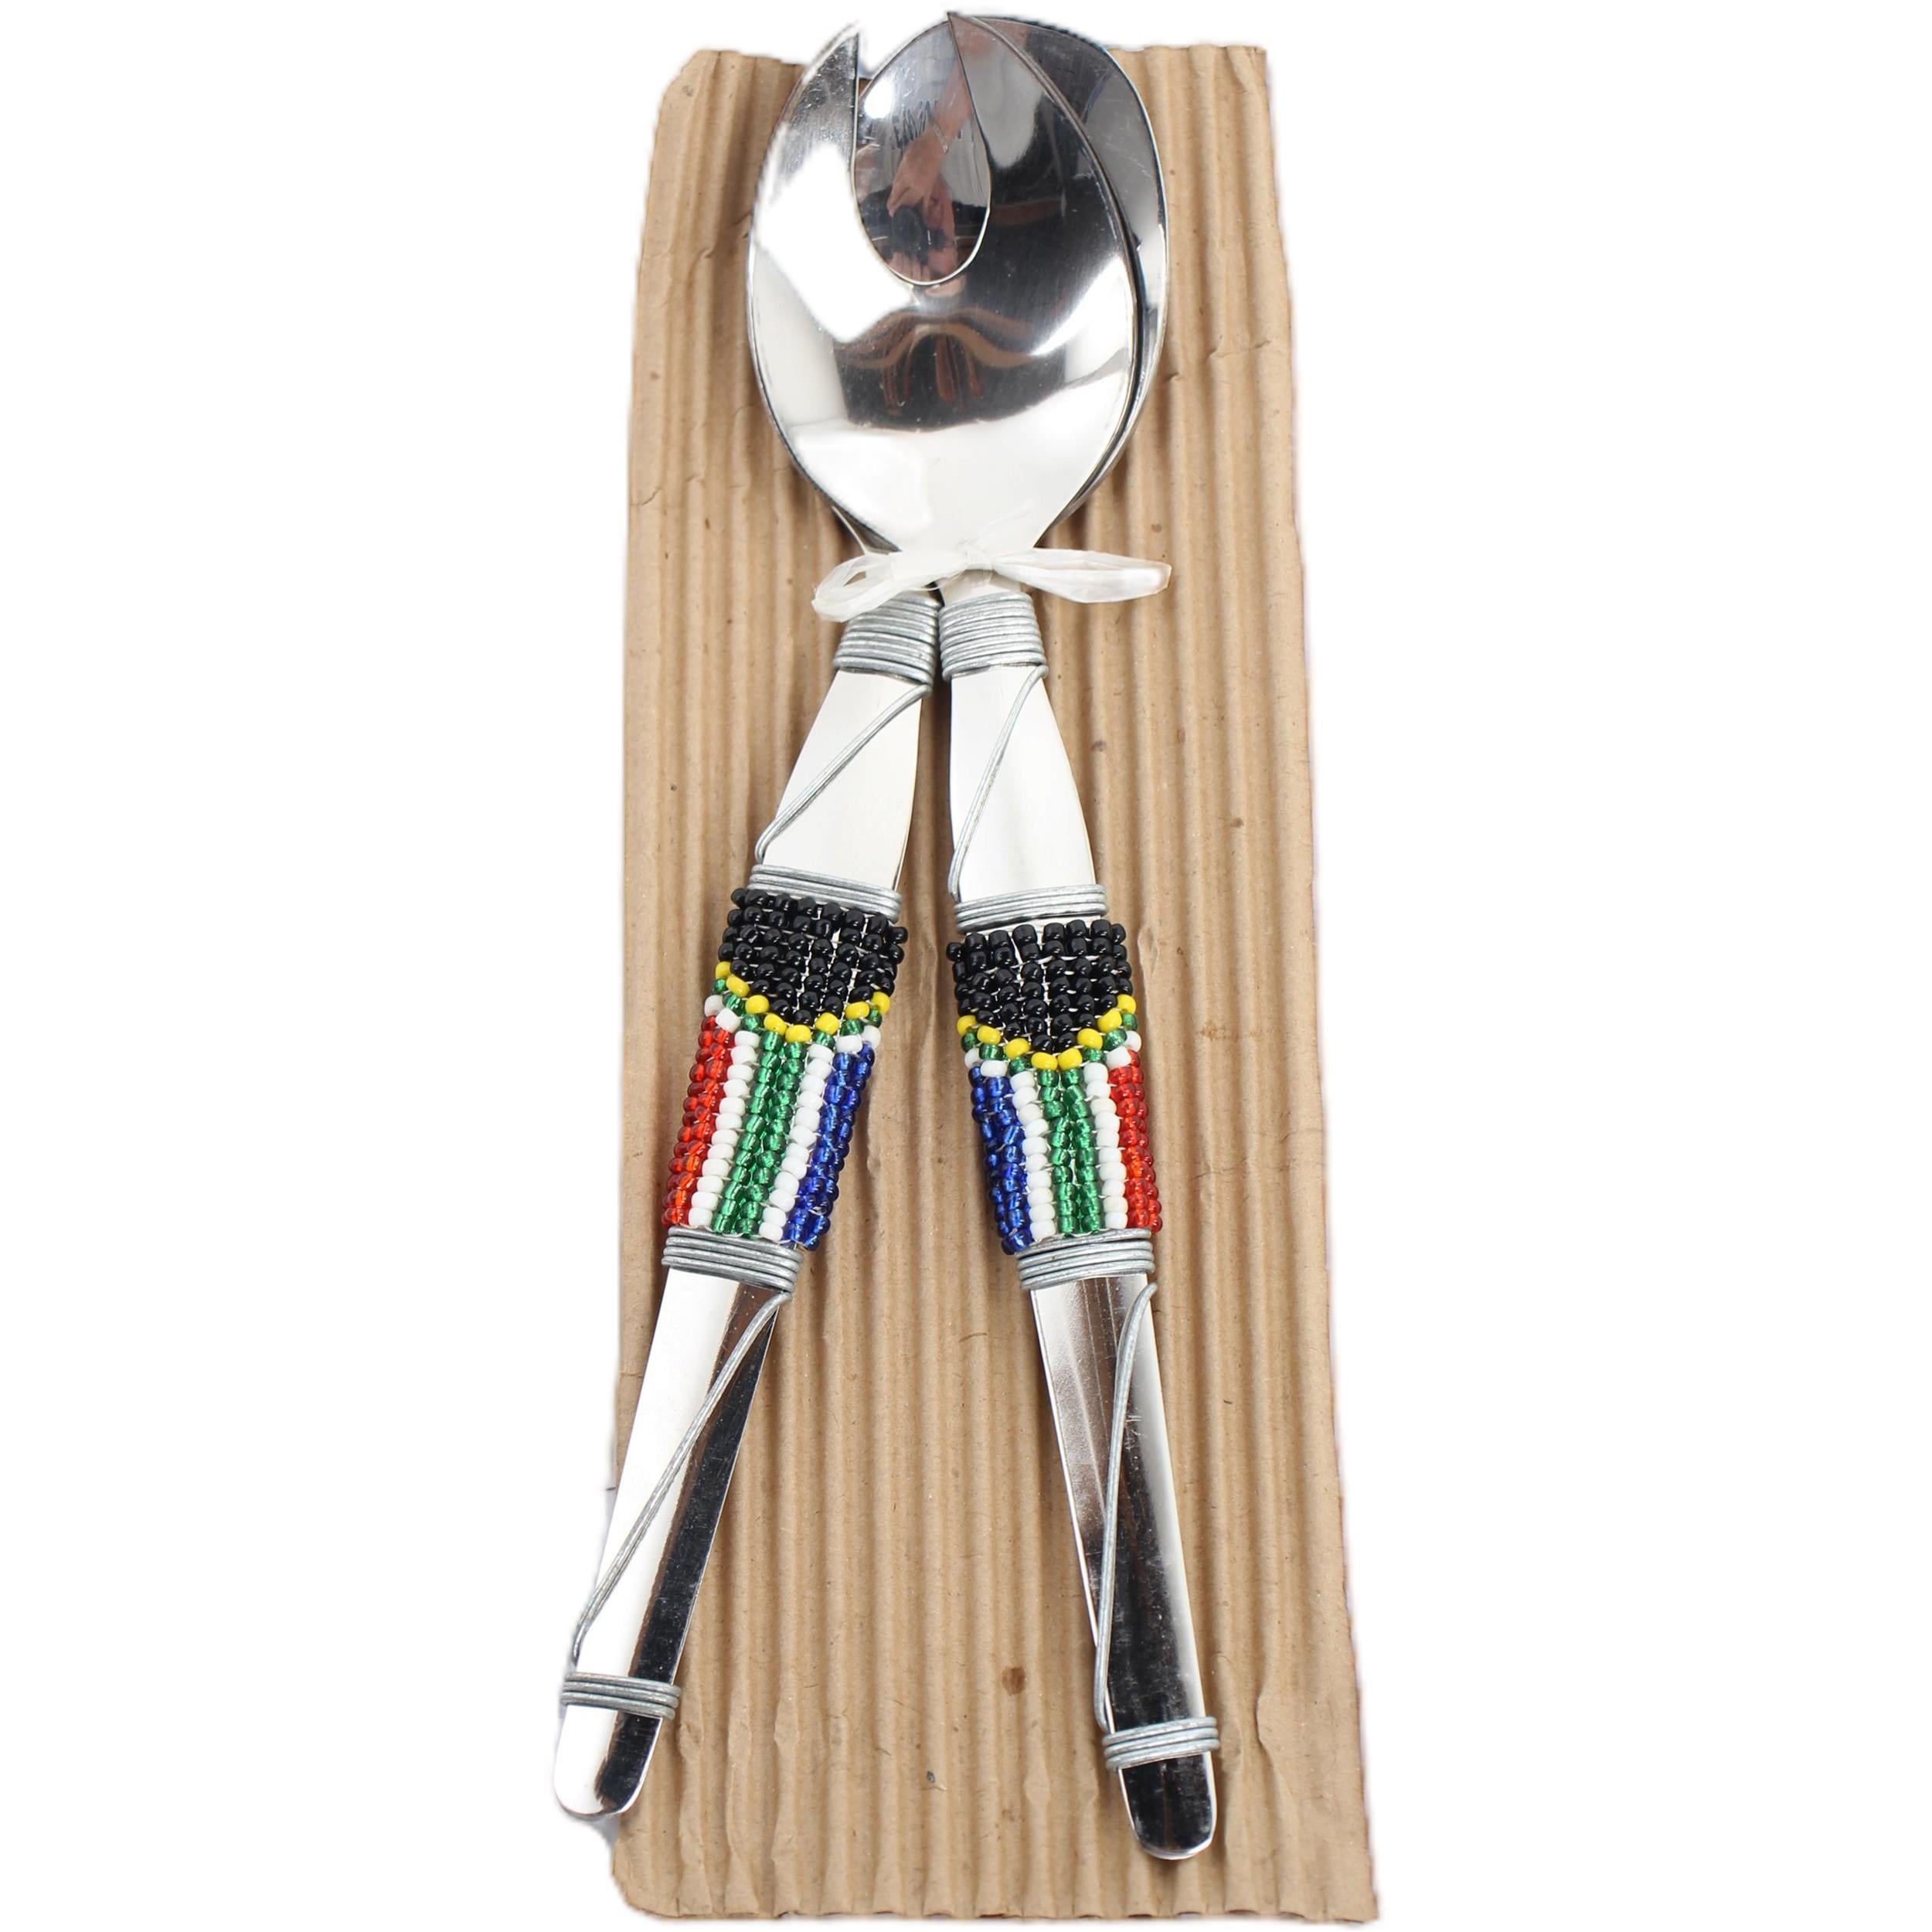 Ndebele Tribe Beaded Tablespoons ~3.1" Tall - Beaded Tablespoons